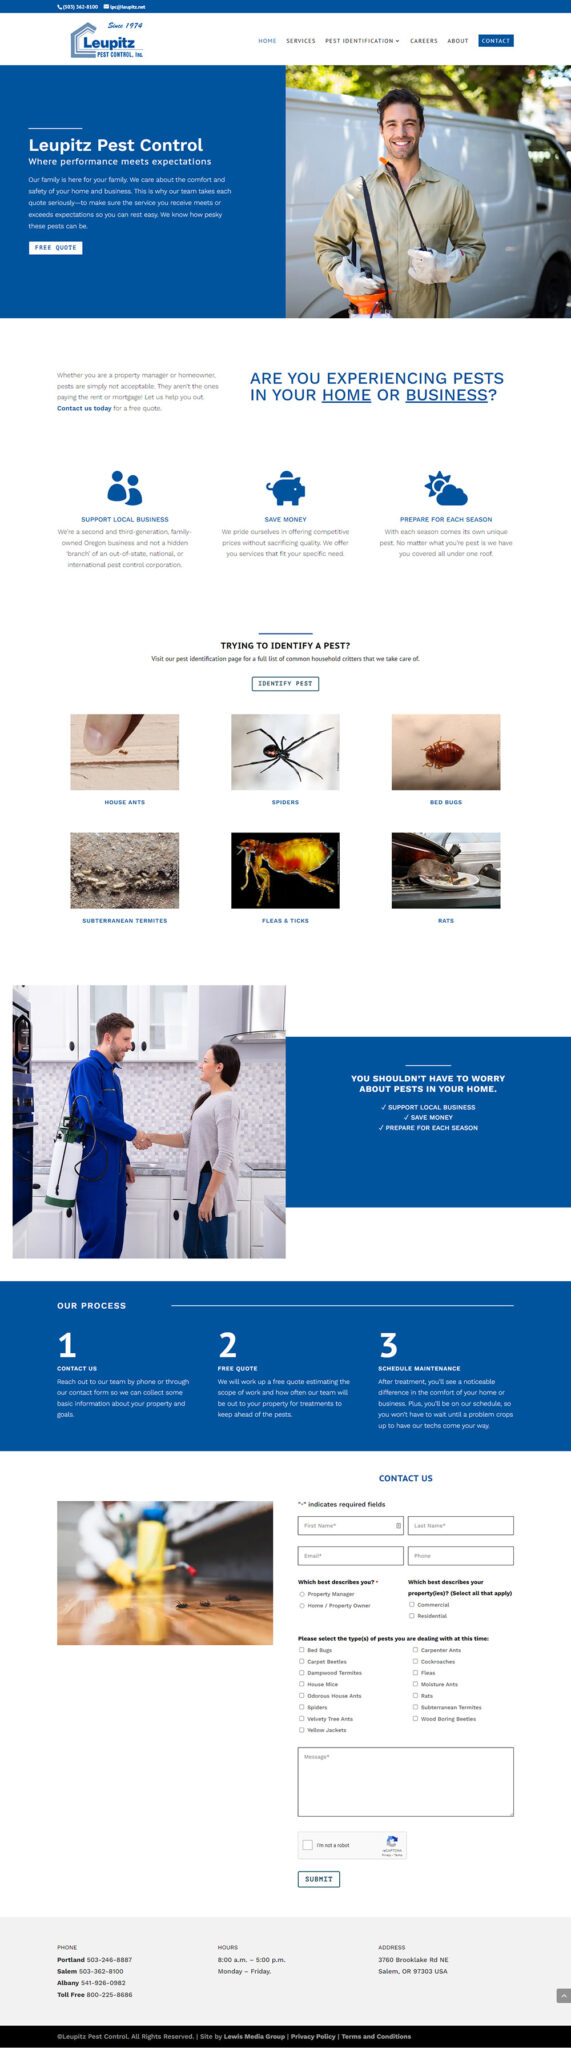 Leupitz Pest Control home page after redesign